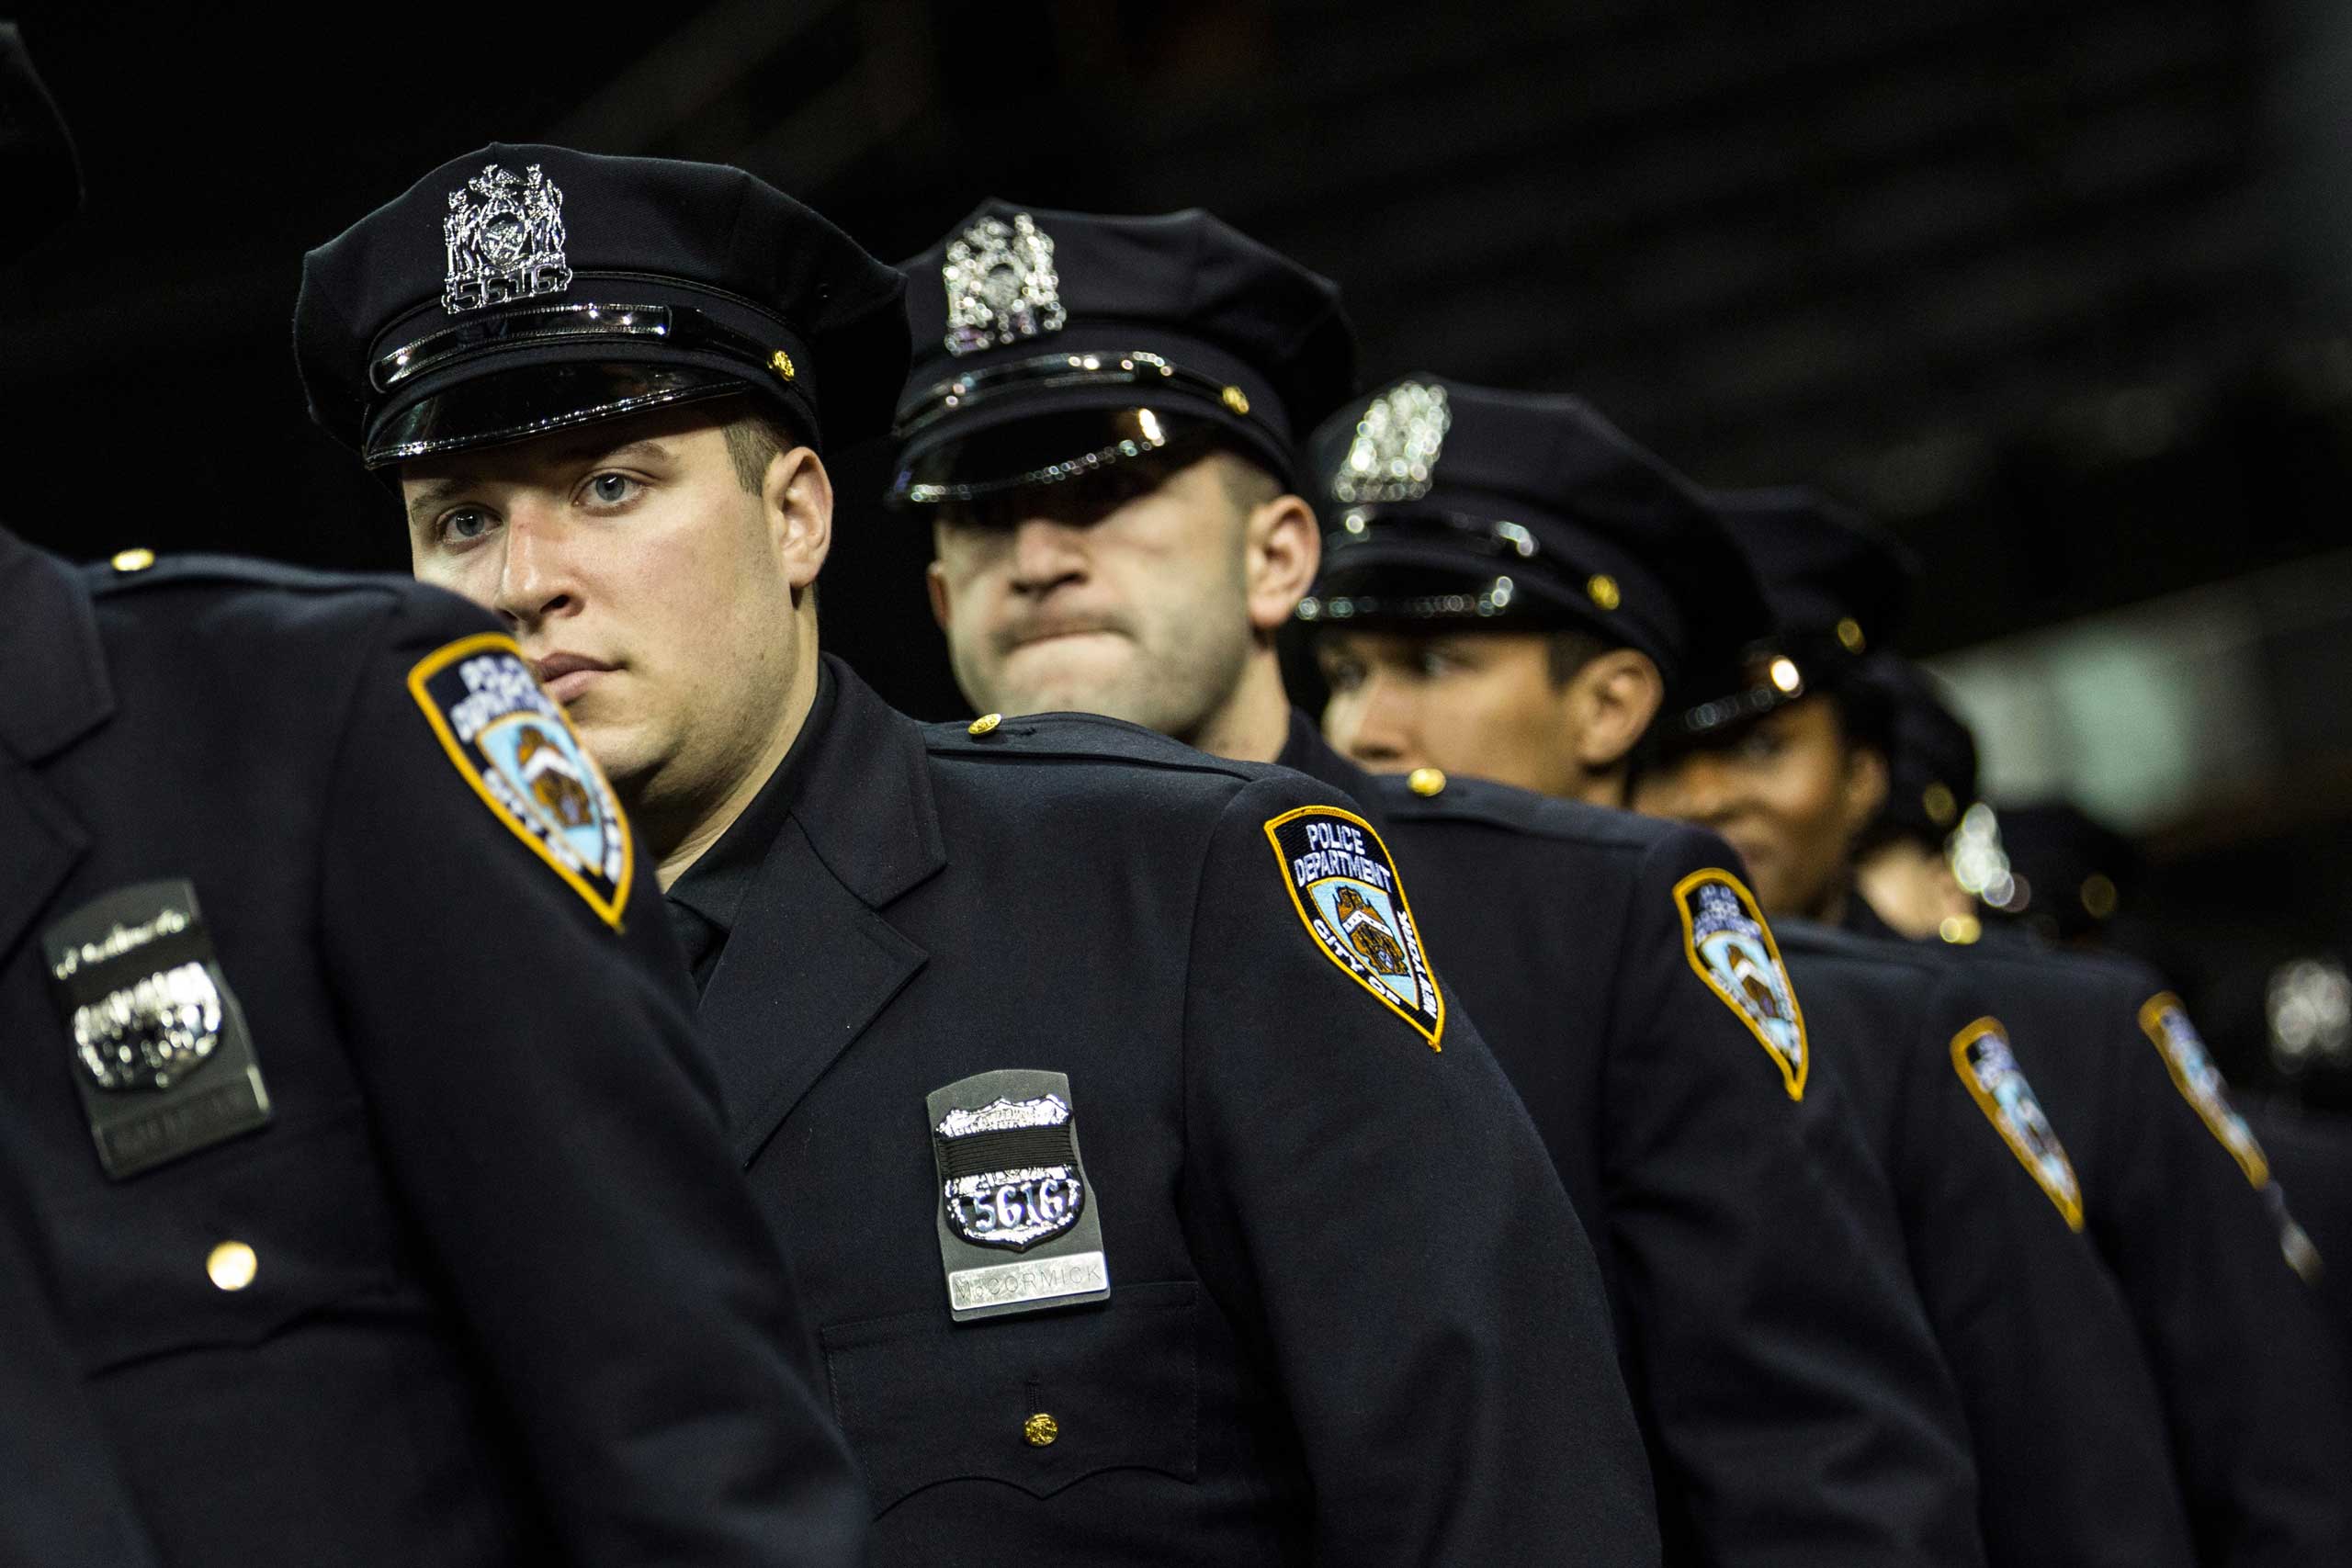 Police officers attend their New York Police Department graduation ceremony at Madison Square Garden on Dec. 29, 2014 in New York City. (Andrew Burton—Getty Images)